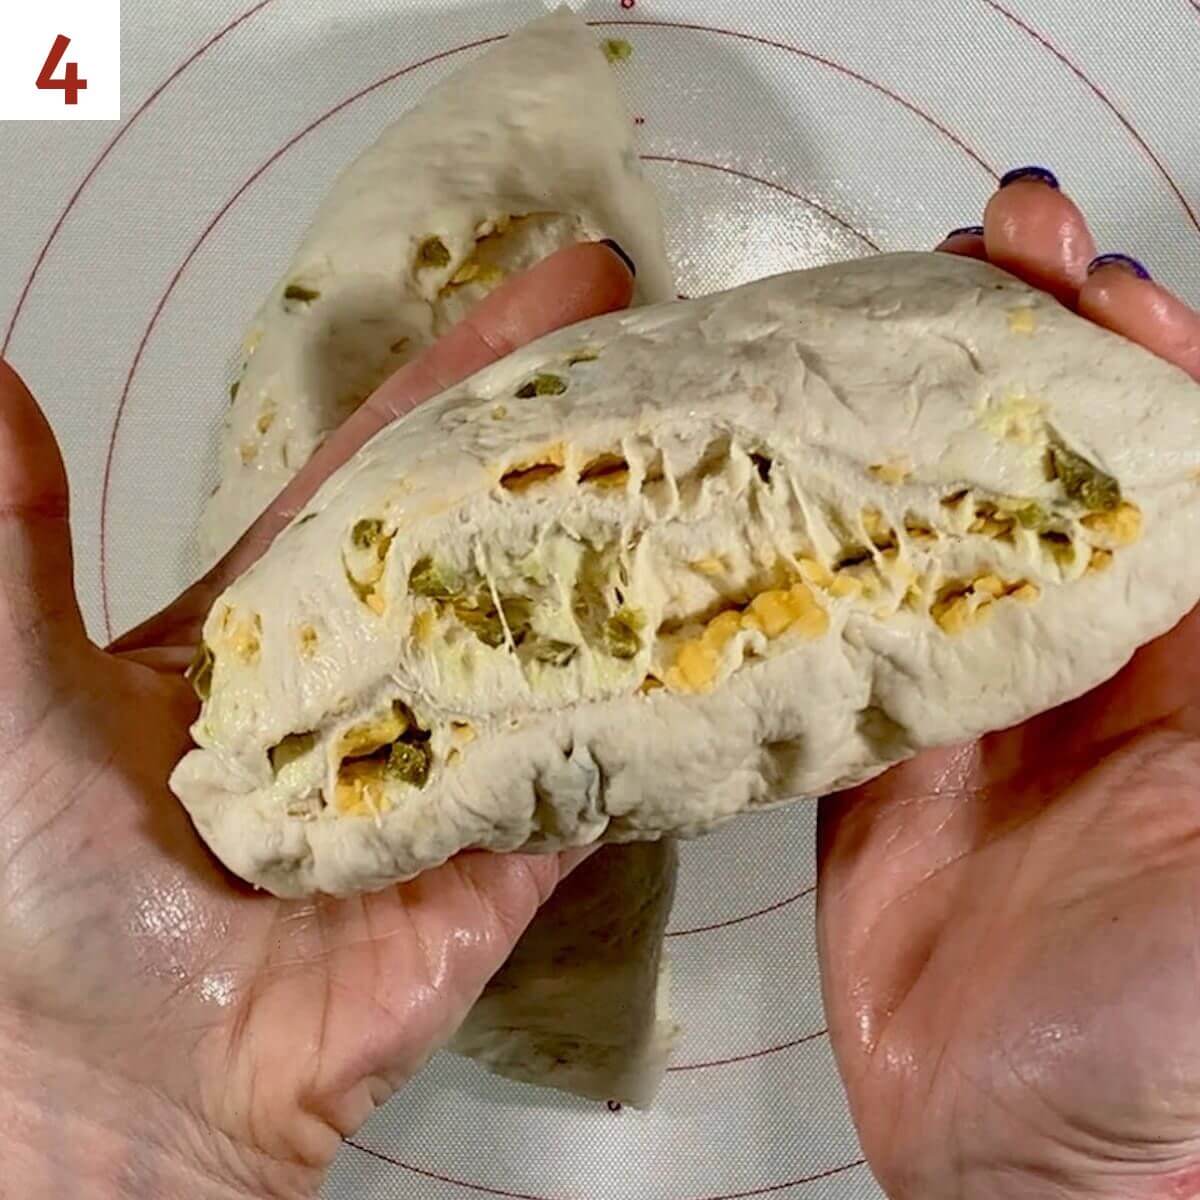 Displaying layers of bread dough stuffed with cheddar cheese & chopped jalapeños.